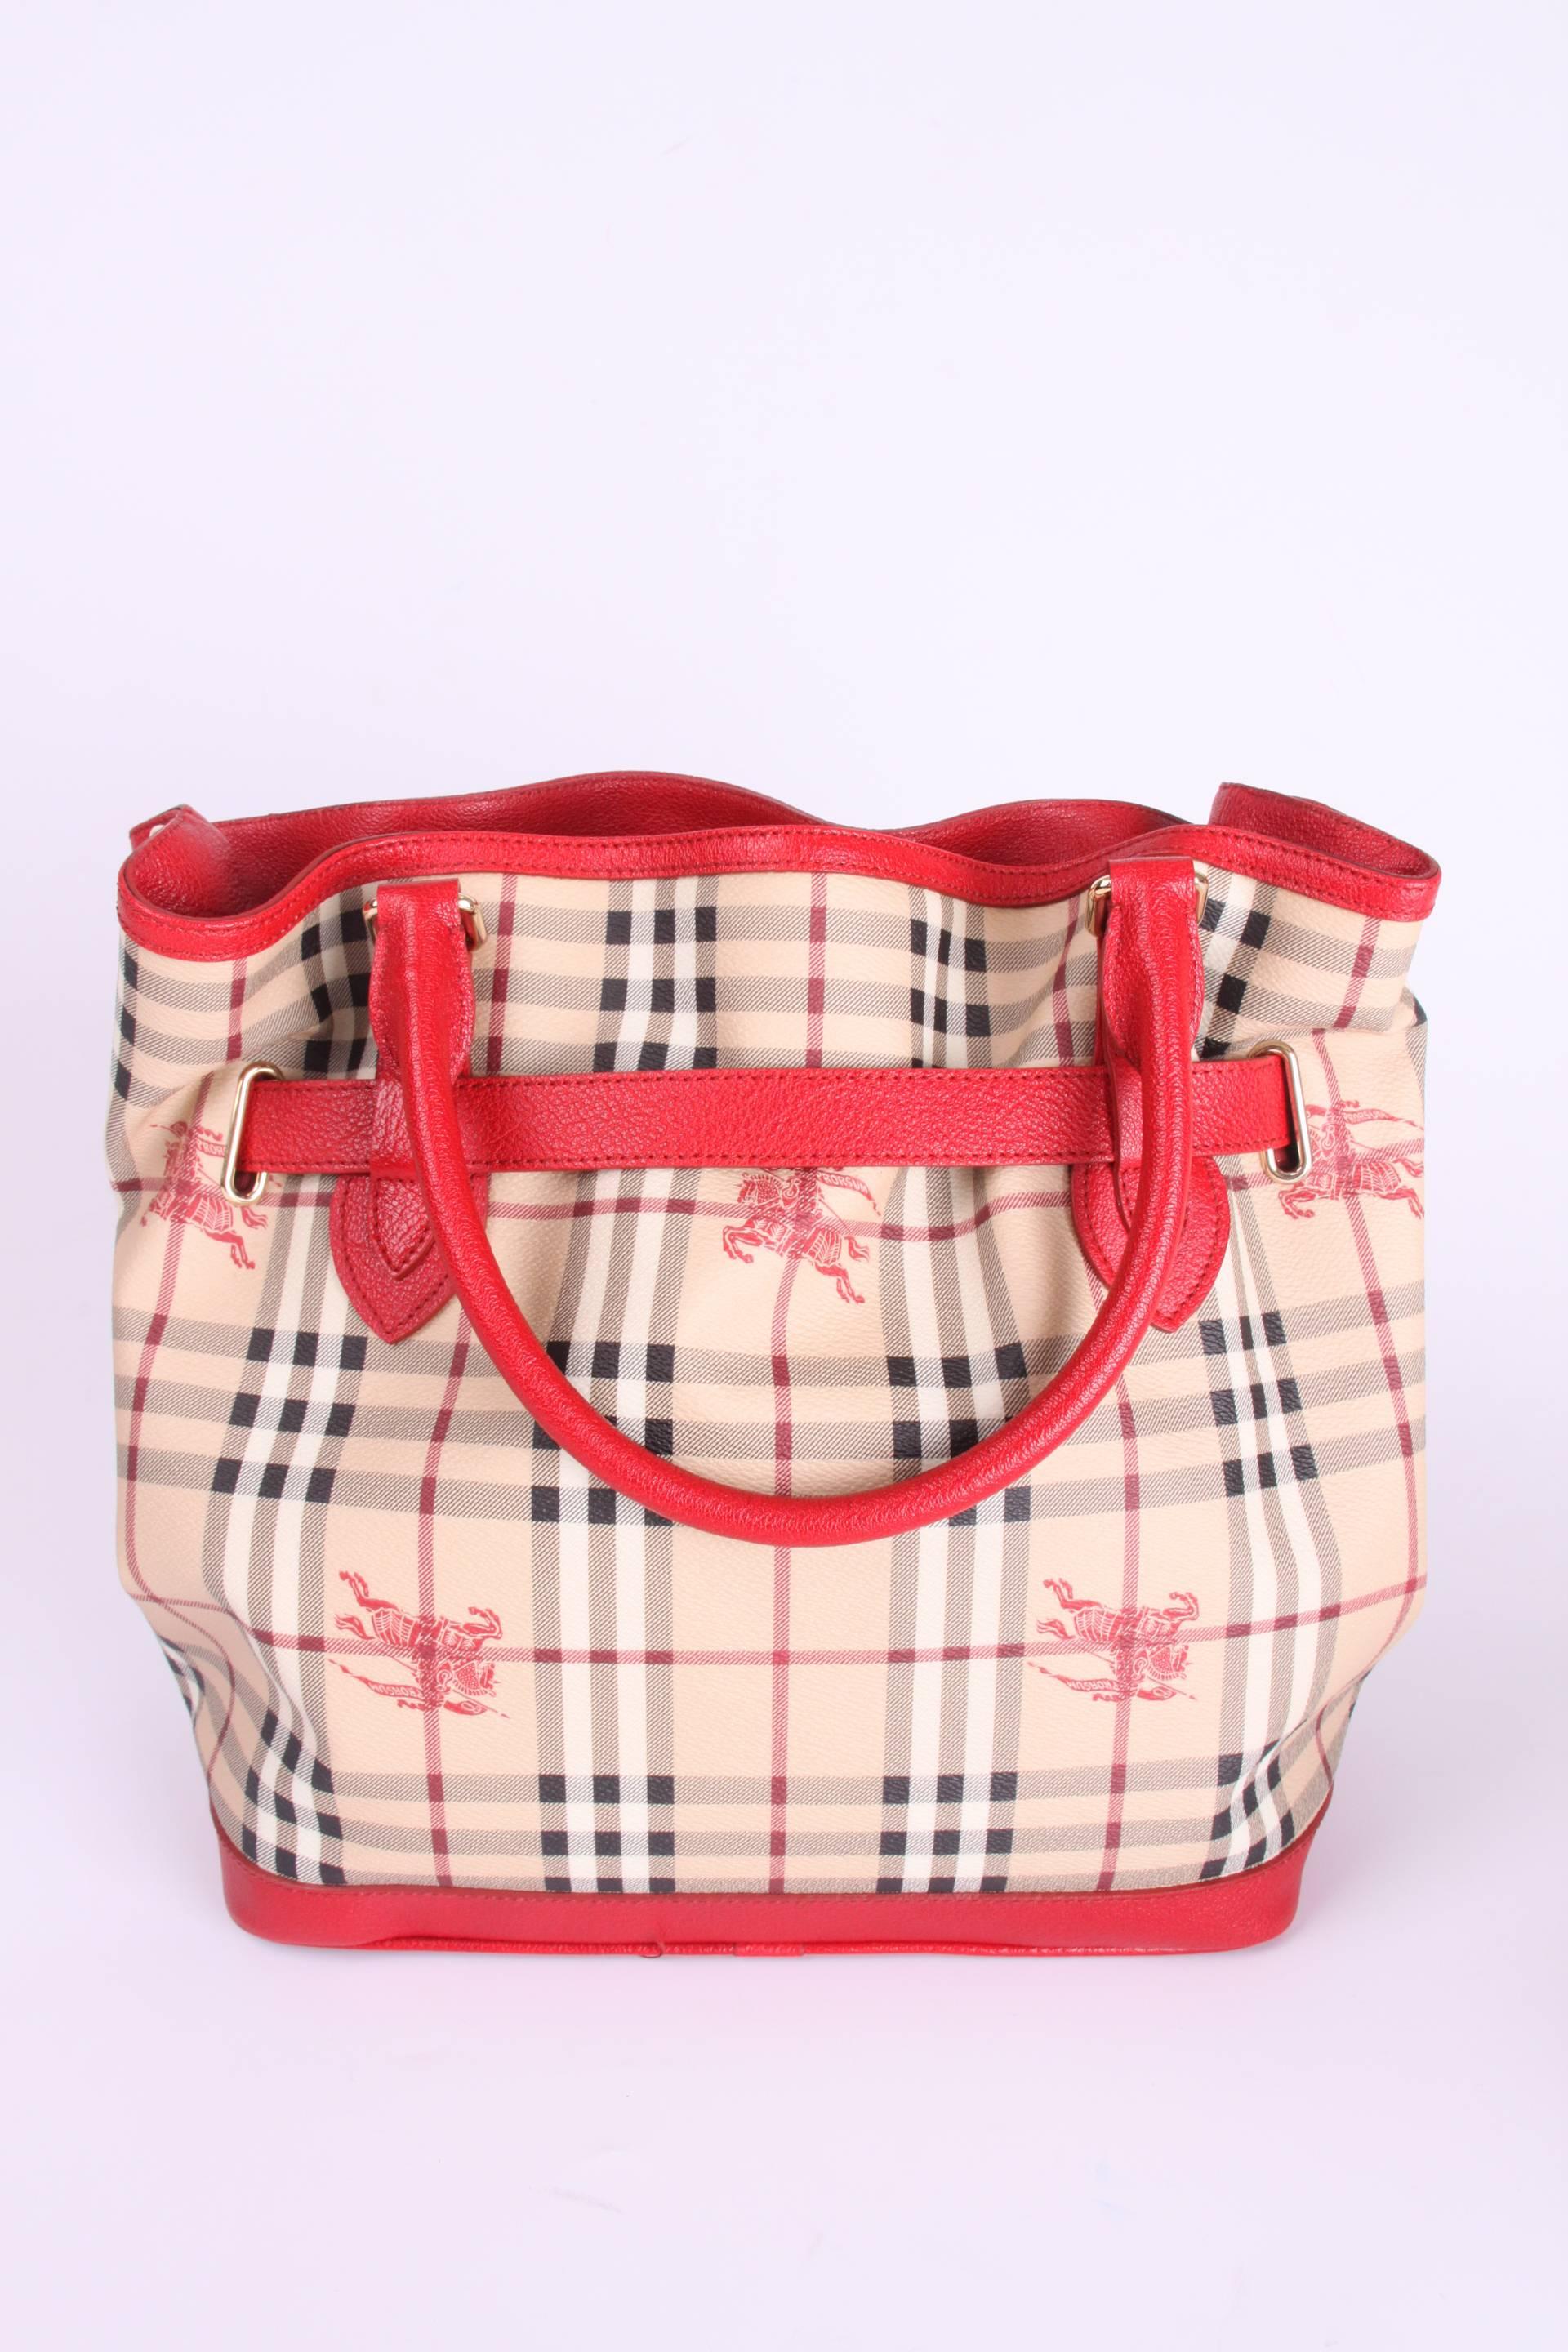 Burberry Checkered Top Handle Bag - red/beige/black/white In New Condition In Baarn, NL